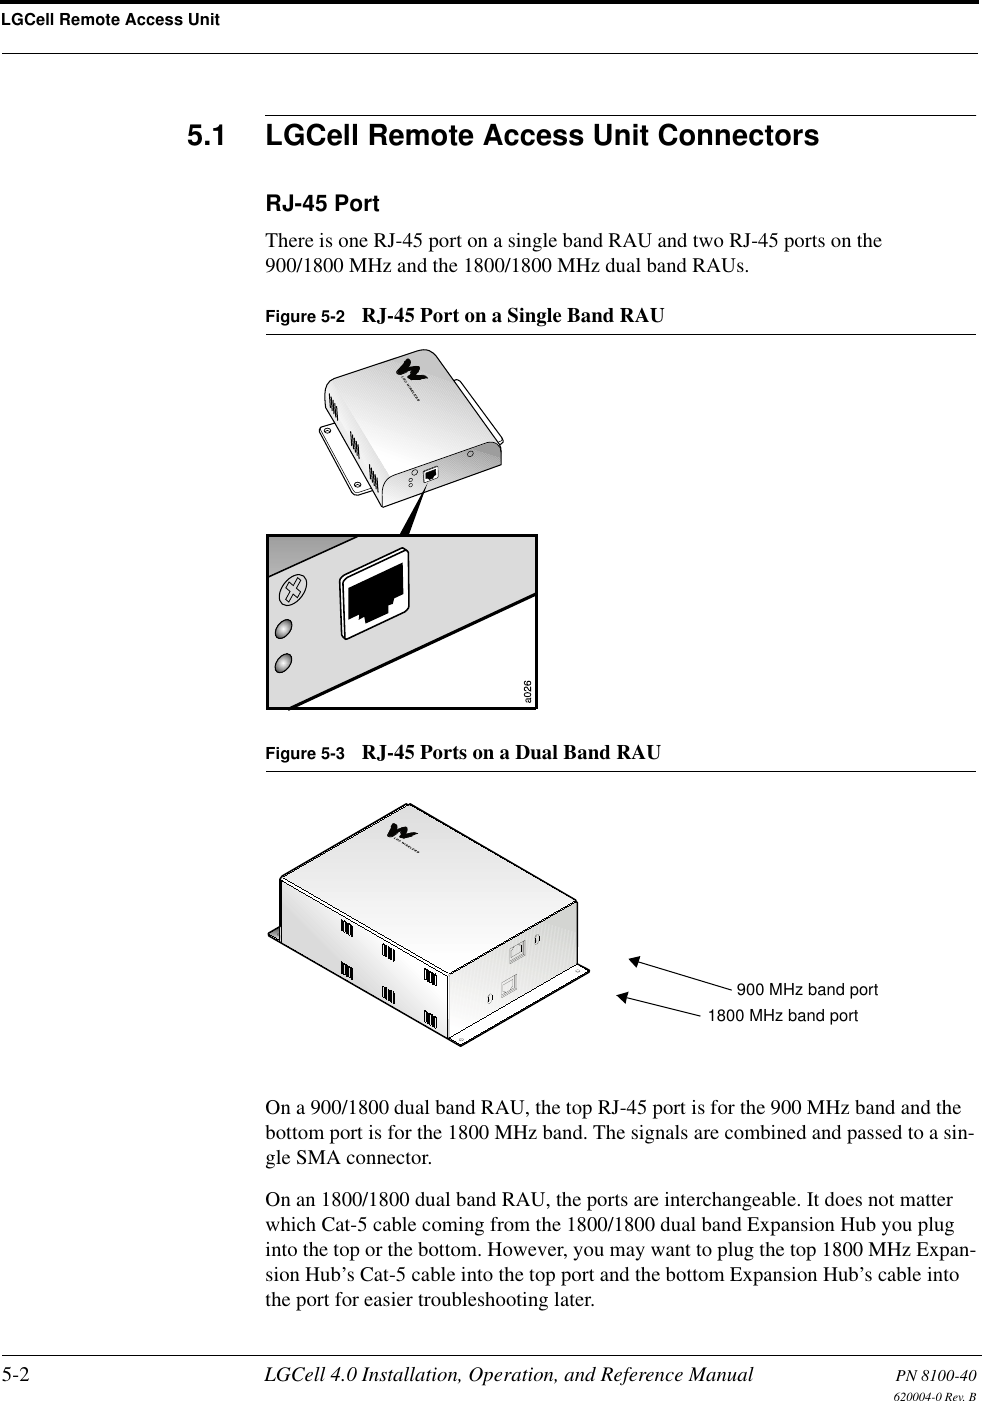 LGCell Remote Access Unit5-2 LGCell 4.0 Installation, Operation, and Reference Manual PN 8100-40620004-0 Rev. B5.1 LGCell Remote Access Unit ConnectorsRJ-45 PortThere is one RJ-45 port on a single band RAU and two RJ-45 ports on the 900/1800 MHz and the 1800/1800 MHz dual band RAUs. Figure 5-2 RJ-45 Port on a Single Band RAUFigure 5-3 RJ-45 Ports on a Dual Band RAUOn a 900/1800 dual band RAU, the top RJ-45 port is for the 900 MHz band and the bottom port is for the 1800 MHz band. The signals are combined and passed to a sin-gle SMA connector.On an 1800/1800 dual band RAU, the ports are interchangeable. It does not matter which Cat-5 cable coming from the 1800/1800 dual band Expansion Hub you plug into the top or the bottom. However, you may want to plug the top 1800 MHz Expan-sion Hub’s Cat-5 cable into the top port and the bottom Expansion Hub’s cable into the port for easier troubleshooting later.900 MHz band port1800 MHz band port